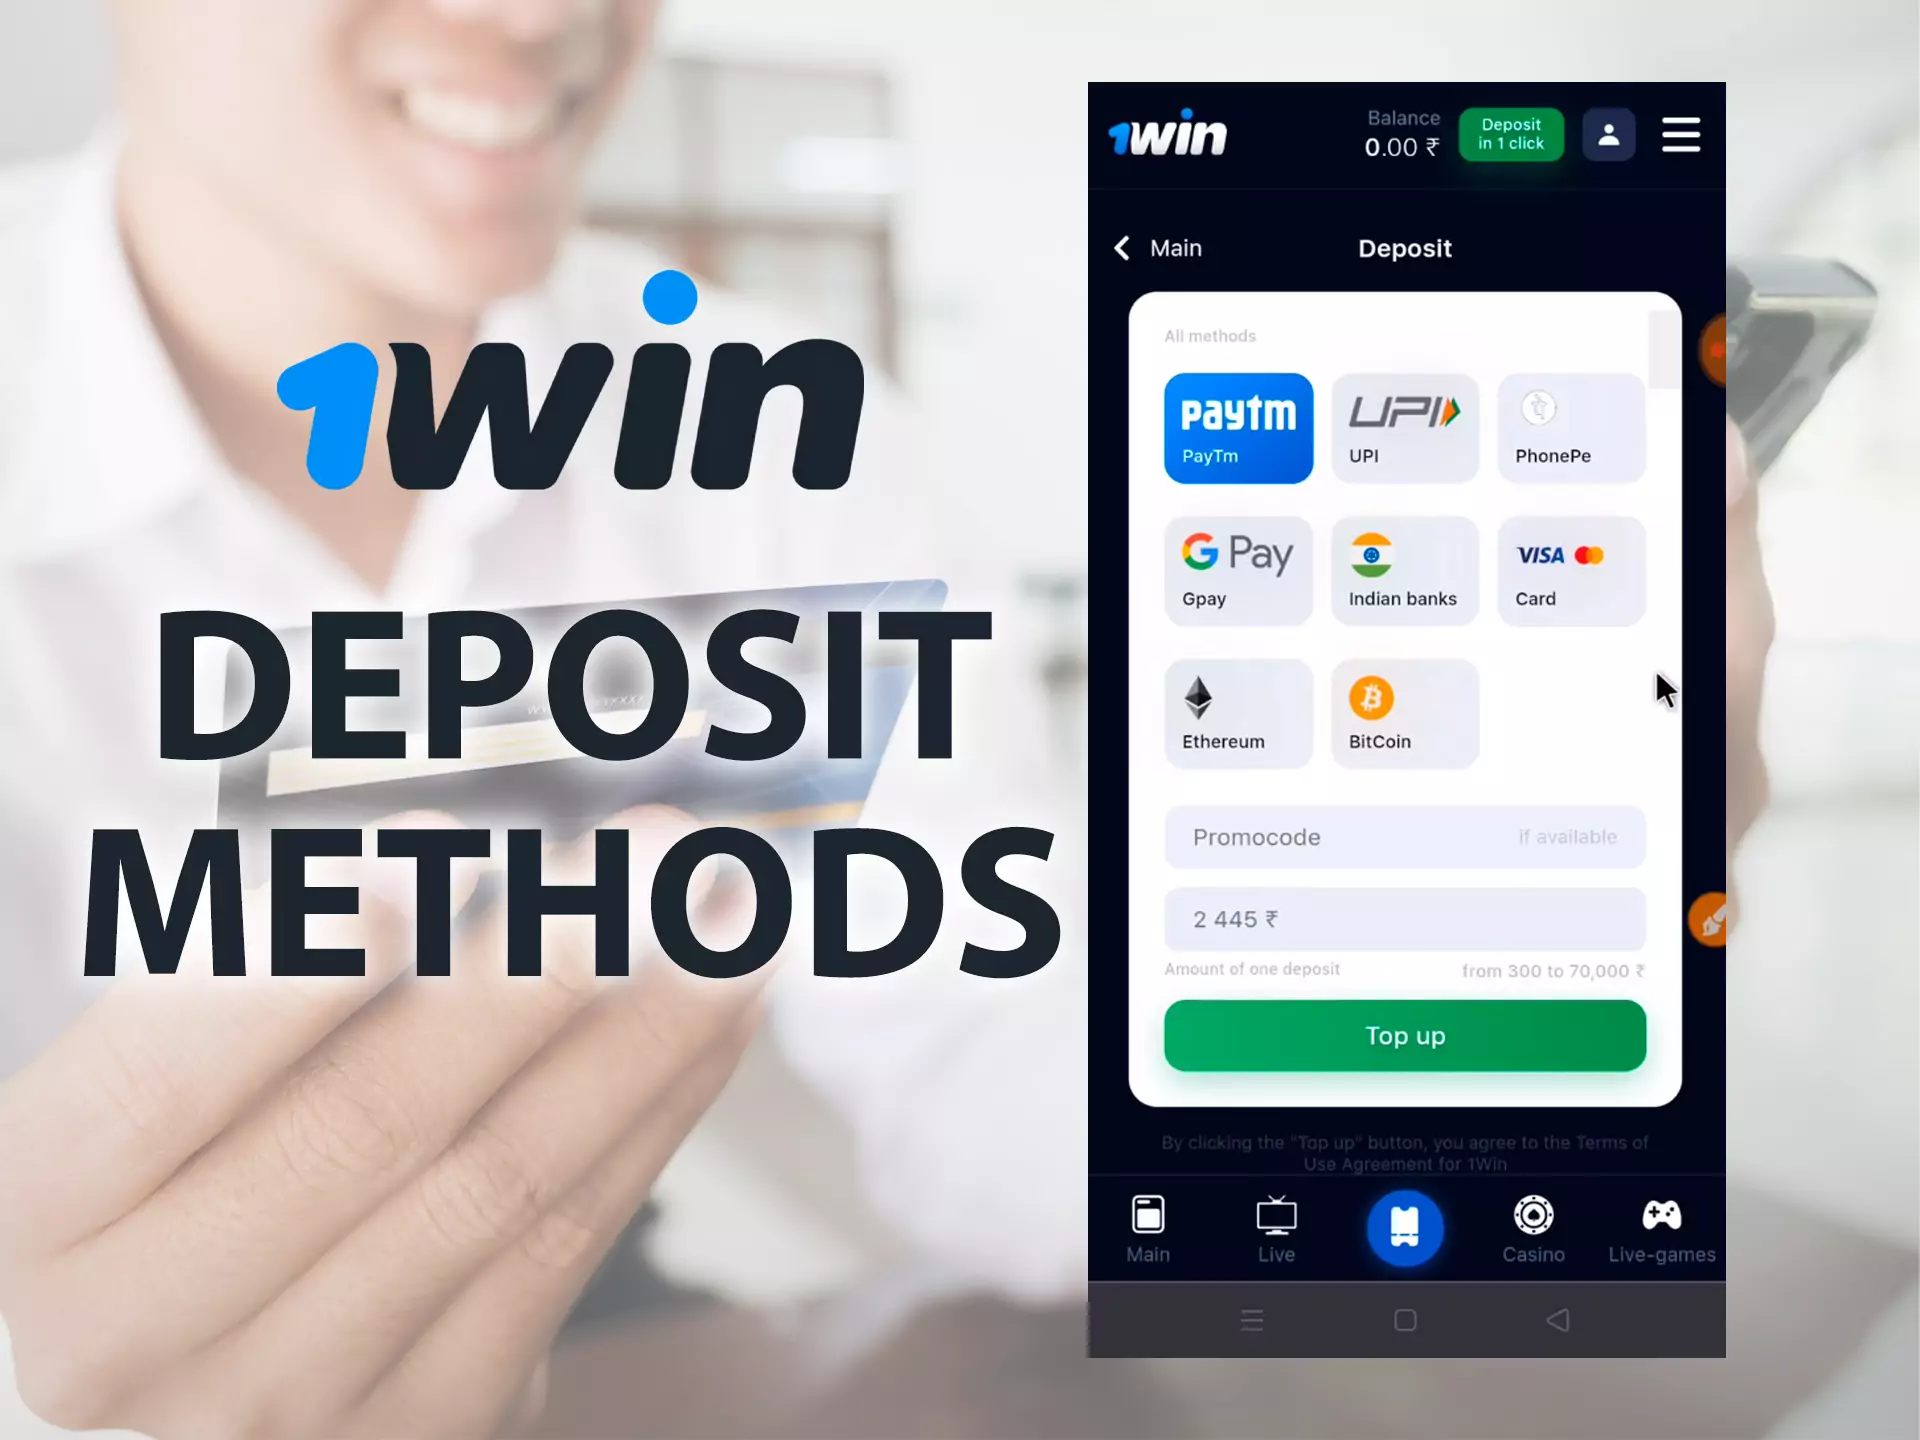 1win offers many convenient deposit methods for Indian players.